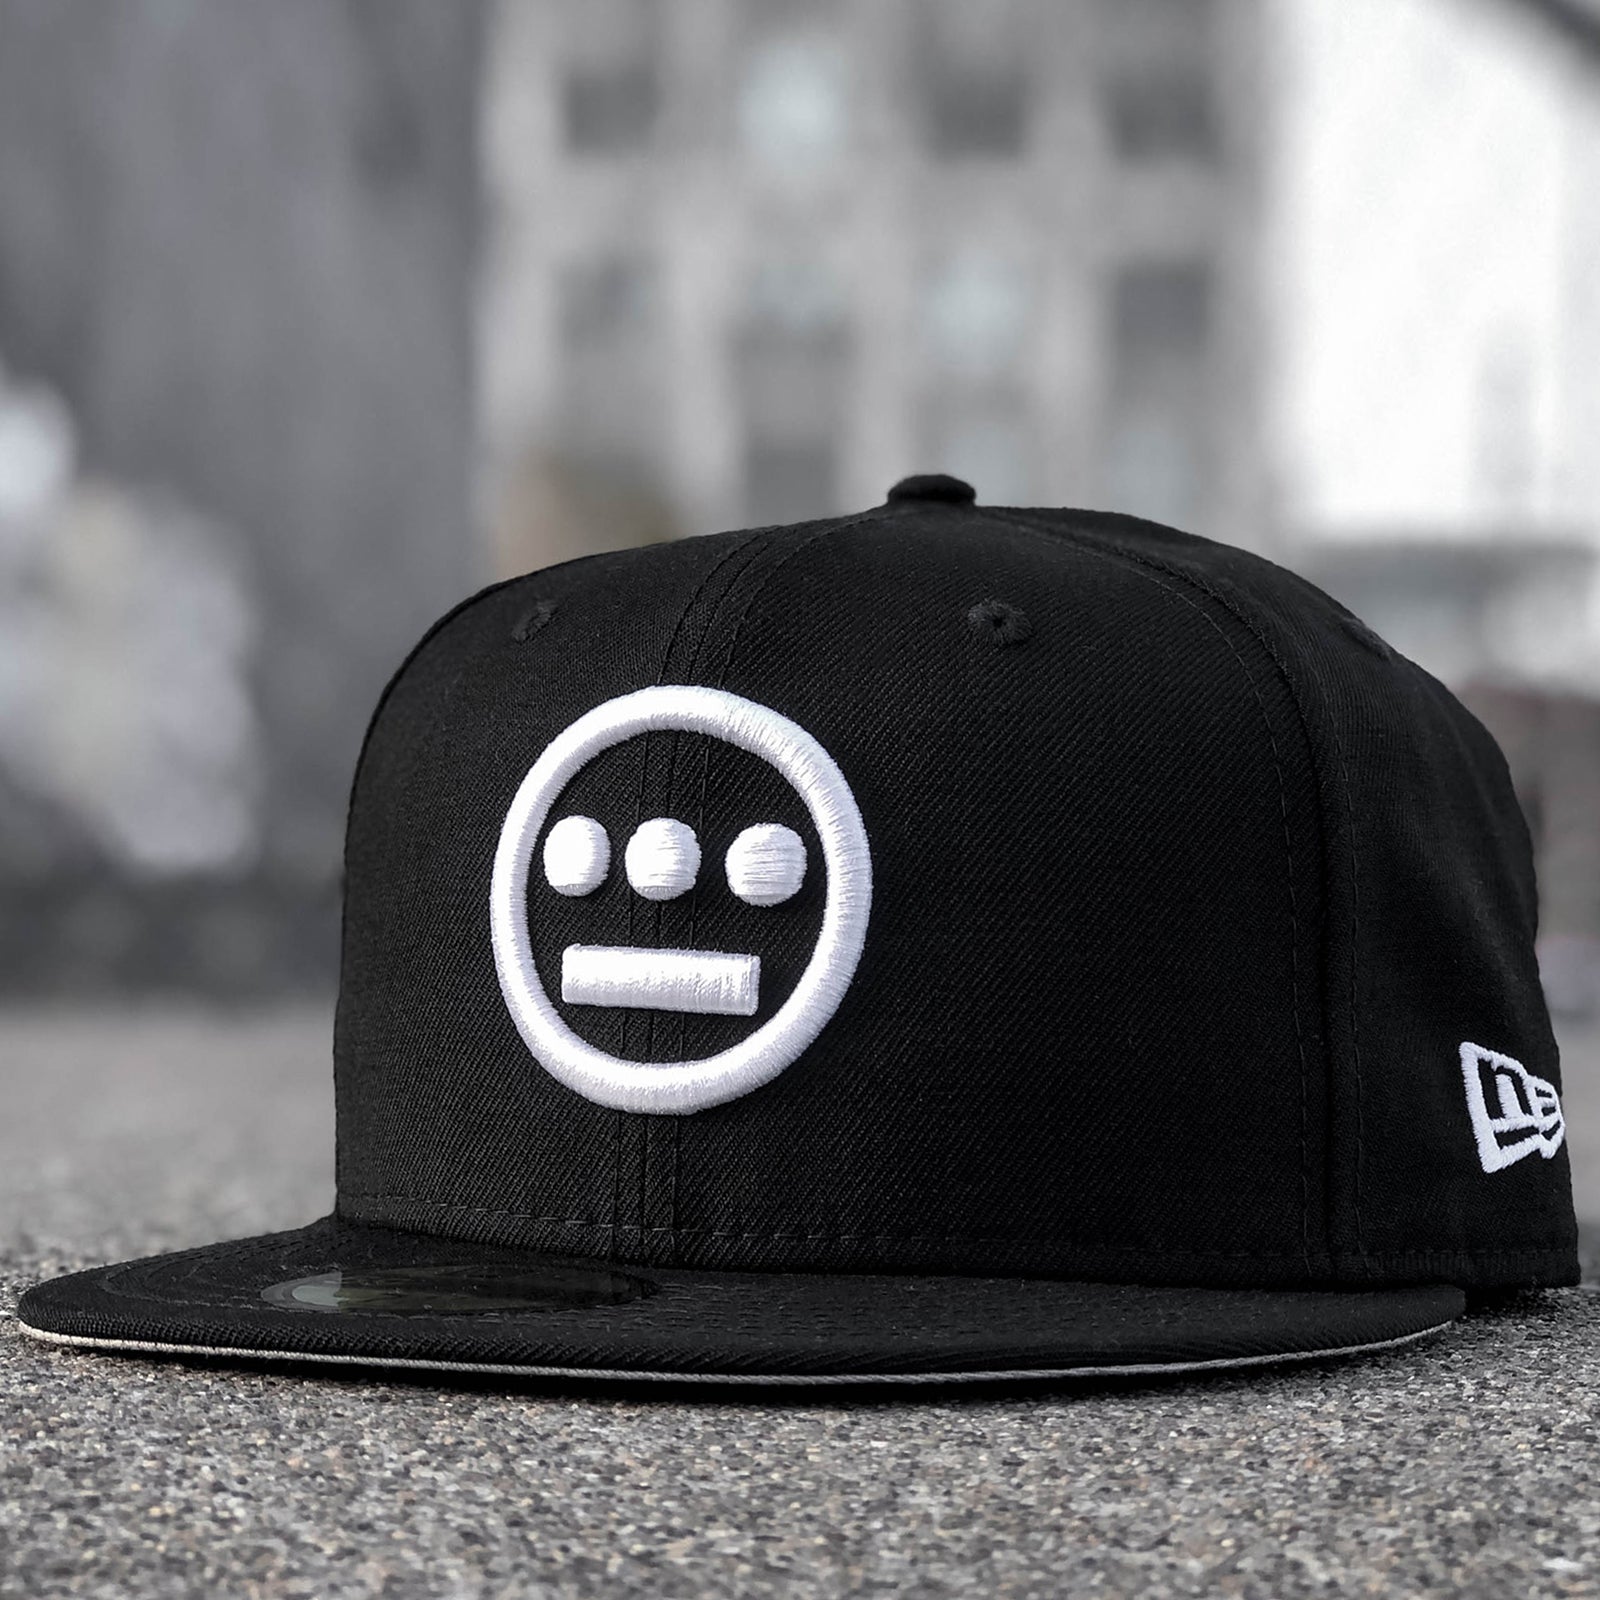 Black cap with white embroidered Hieroglyphics hip-hop logo on the crown and New Era logo on the side on an outdoor sidewalk.